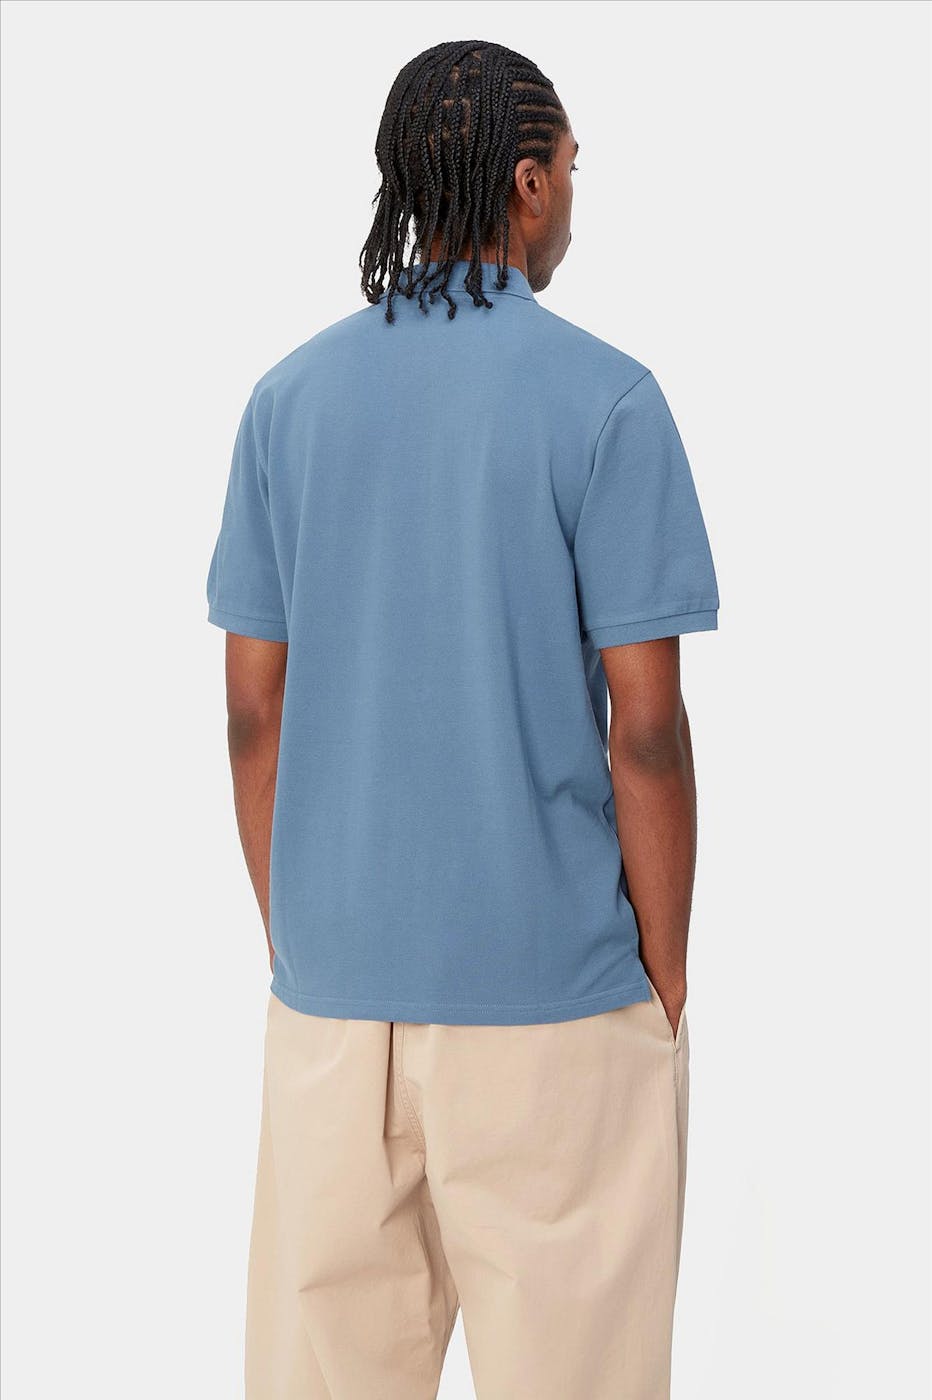 Carhartt WIP - Blauwe Chase Pique polo